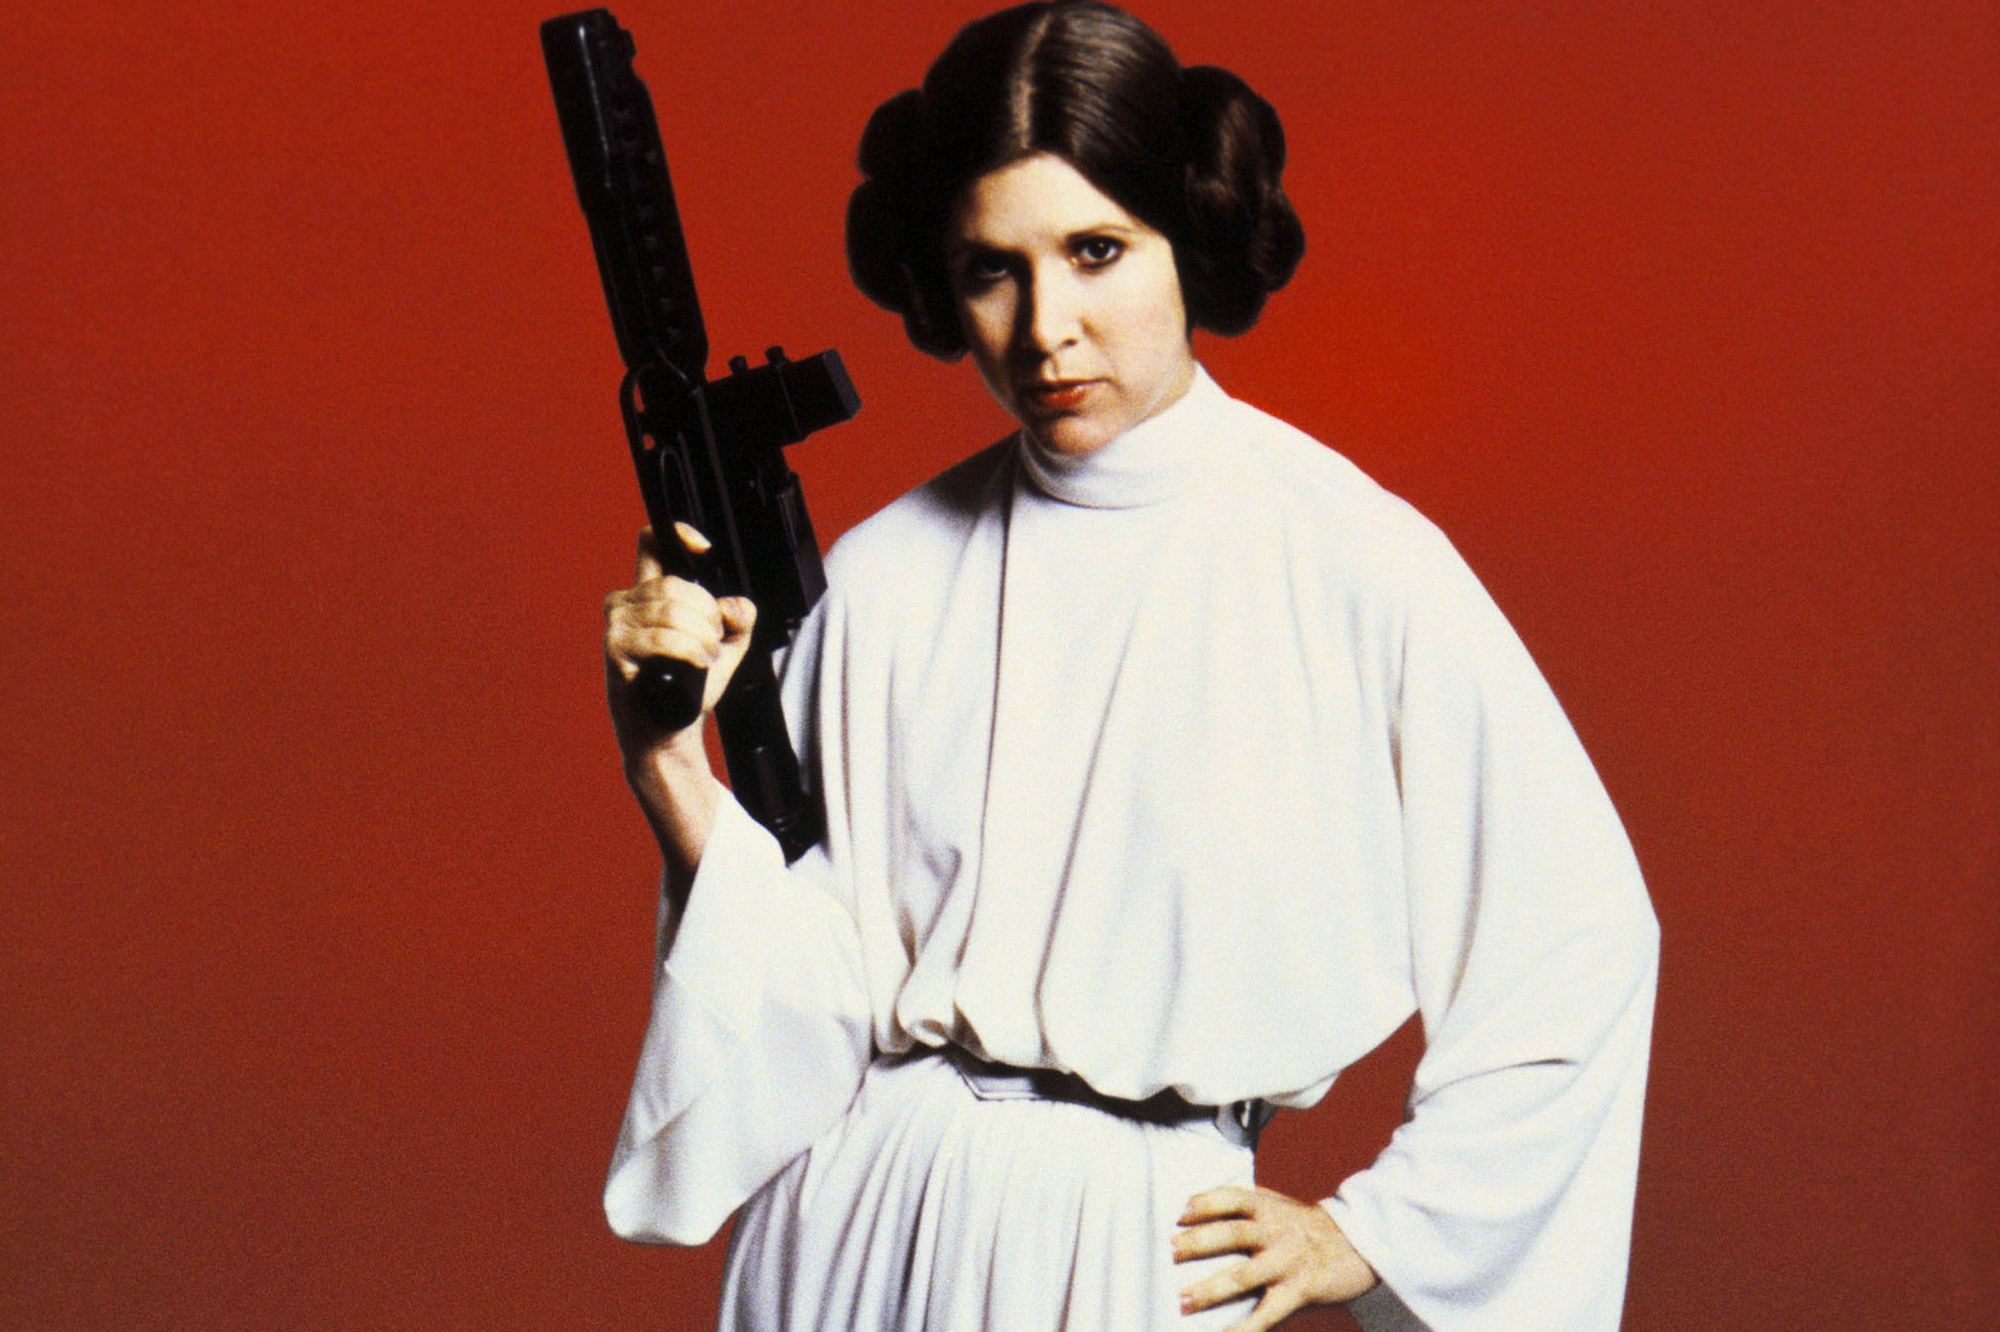 Star wars princess leia fan pictures